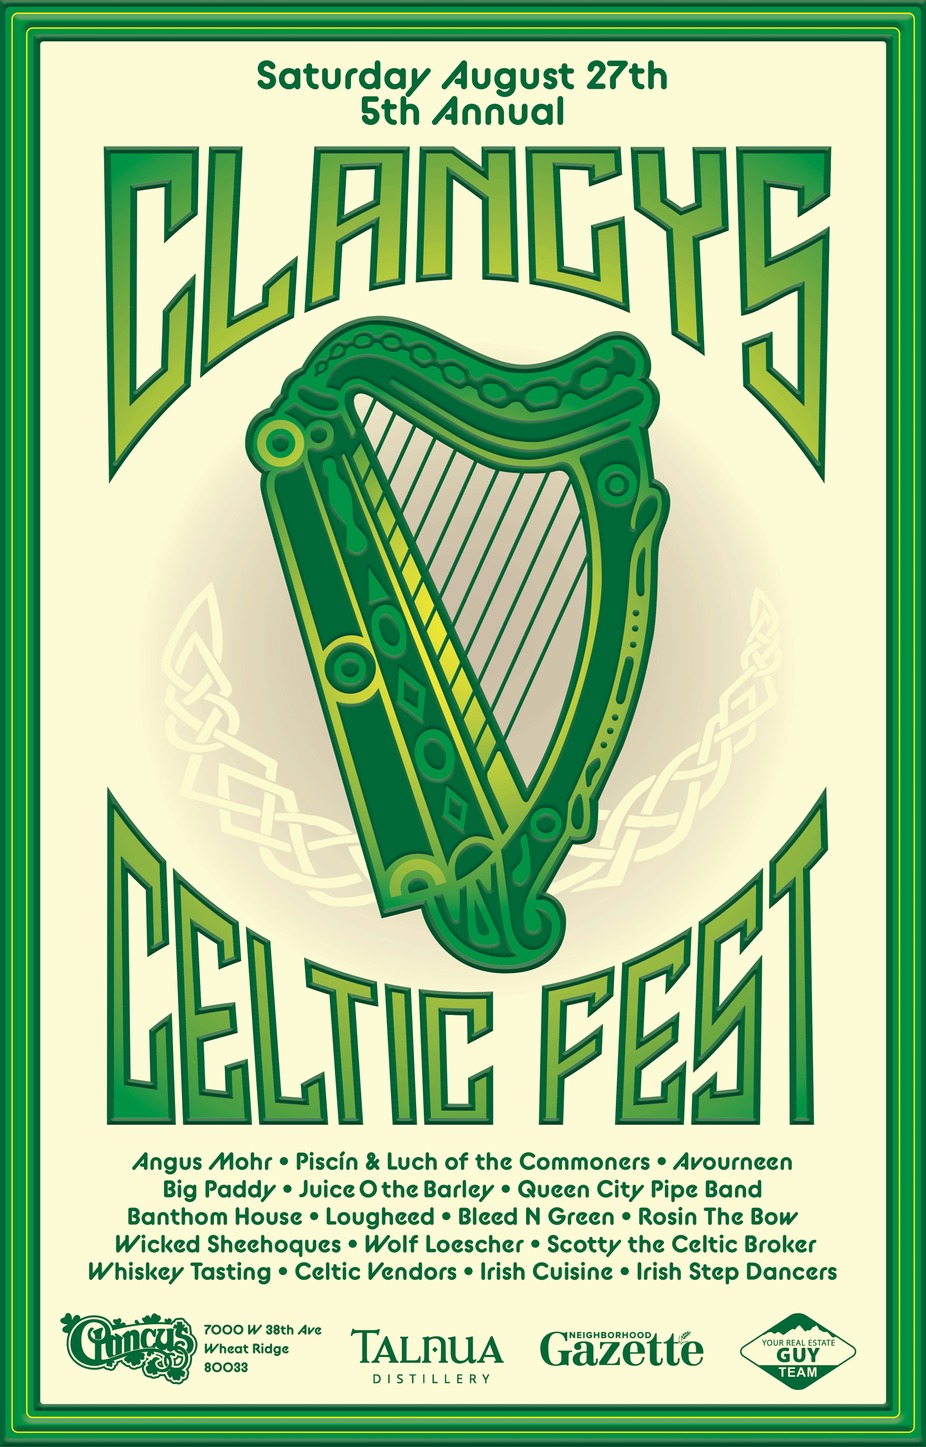 Clancy's Annual Celtic Festival Featuring Angus Mohr event photo